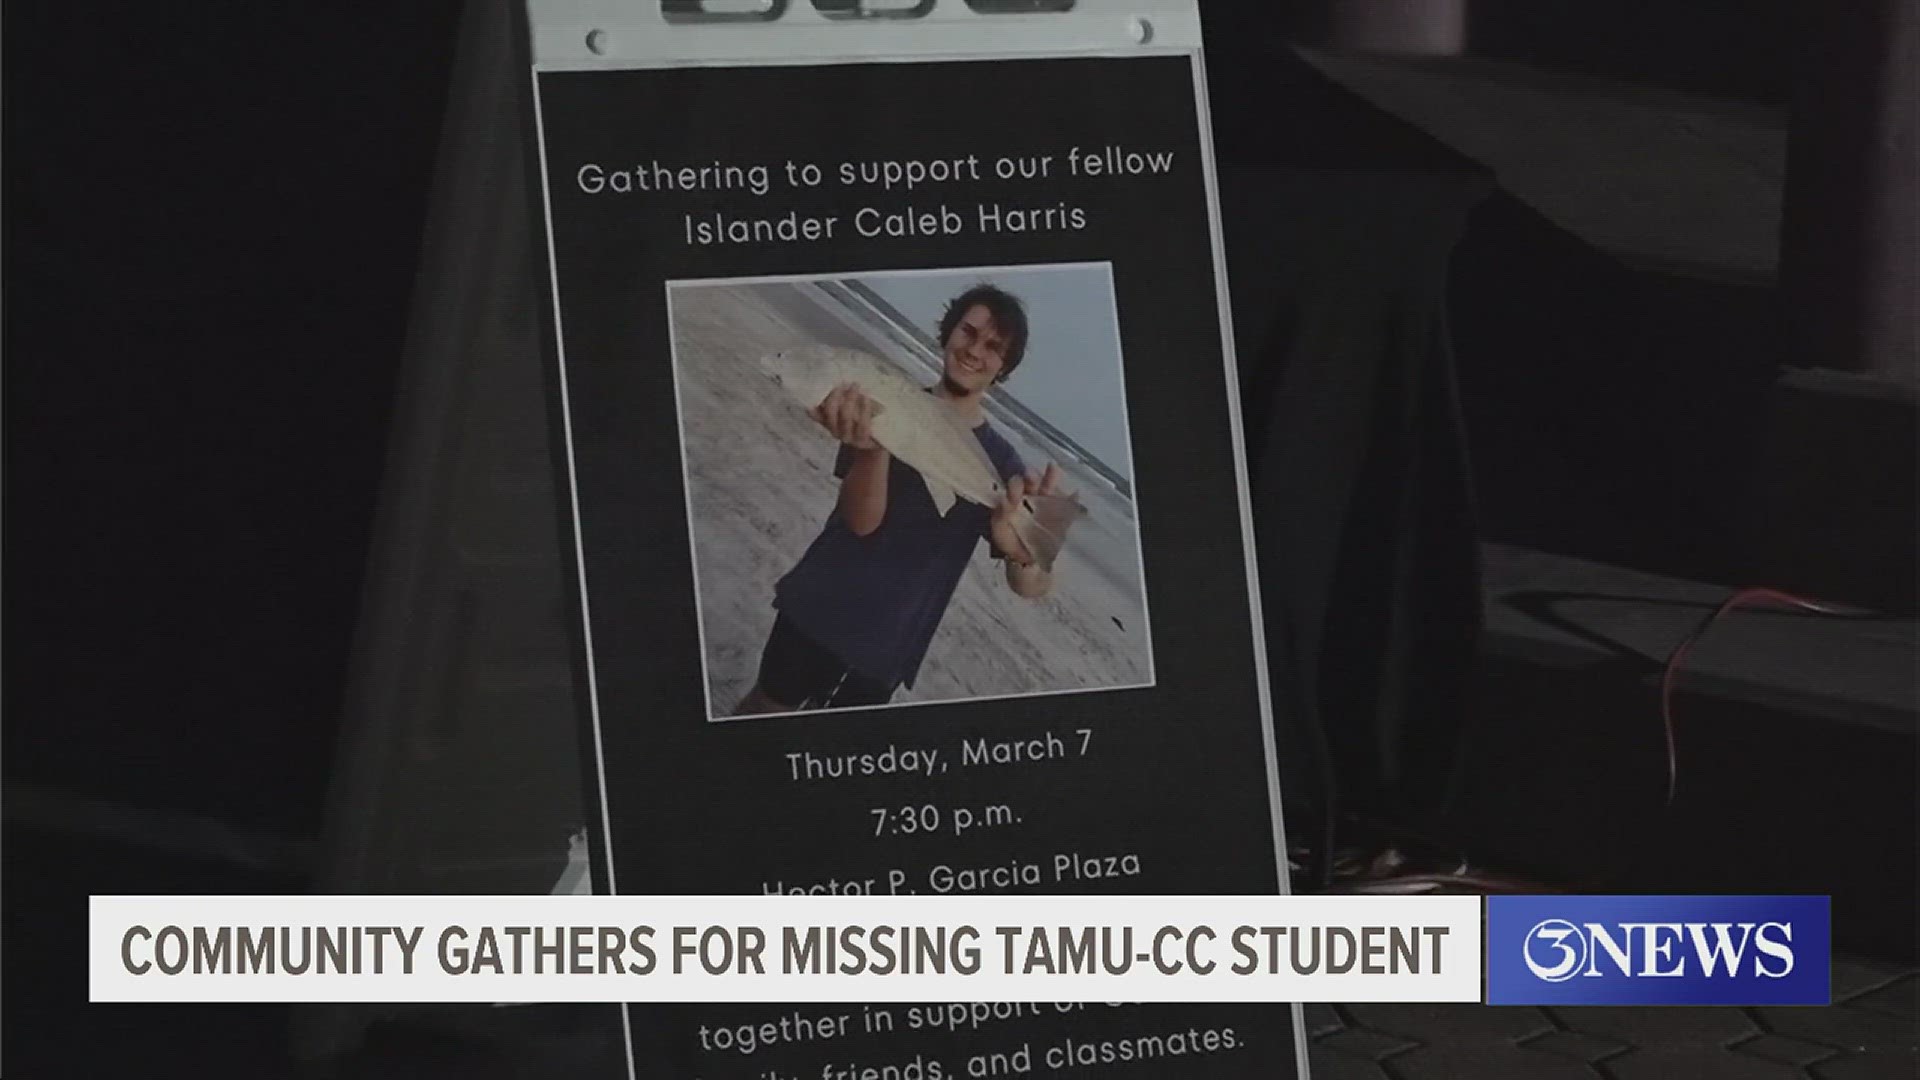 Caleb is a second-year student at TAMU-CC. Thursday evening friends and family gathered on campus to show their support during this difficult time.